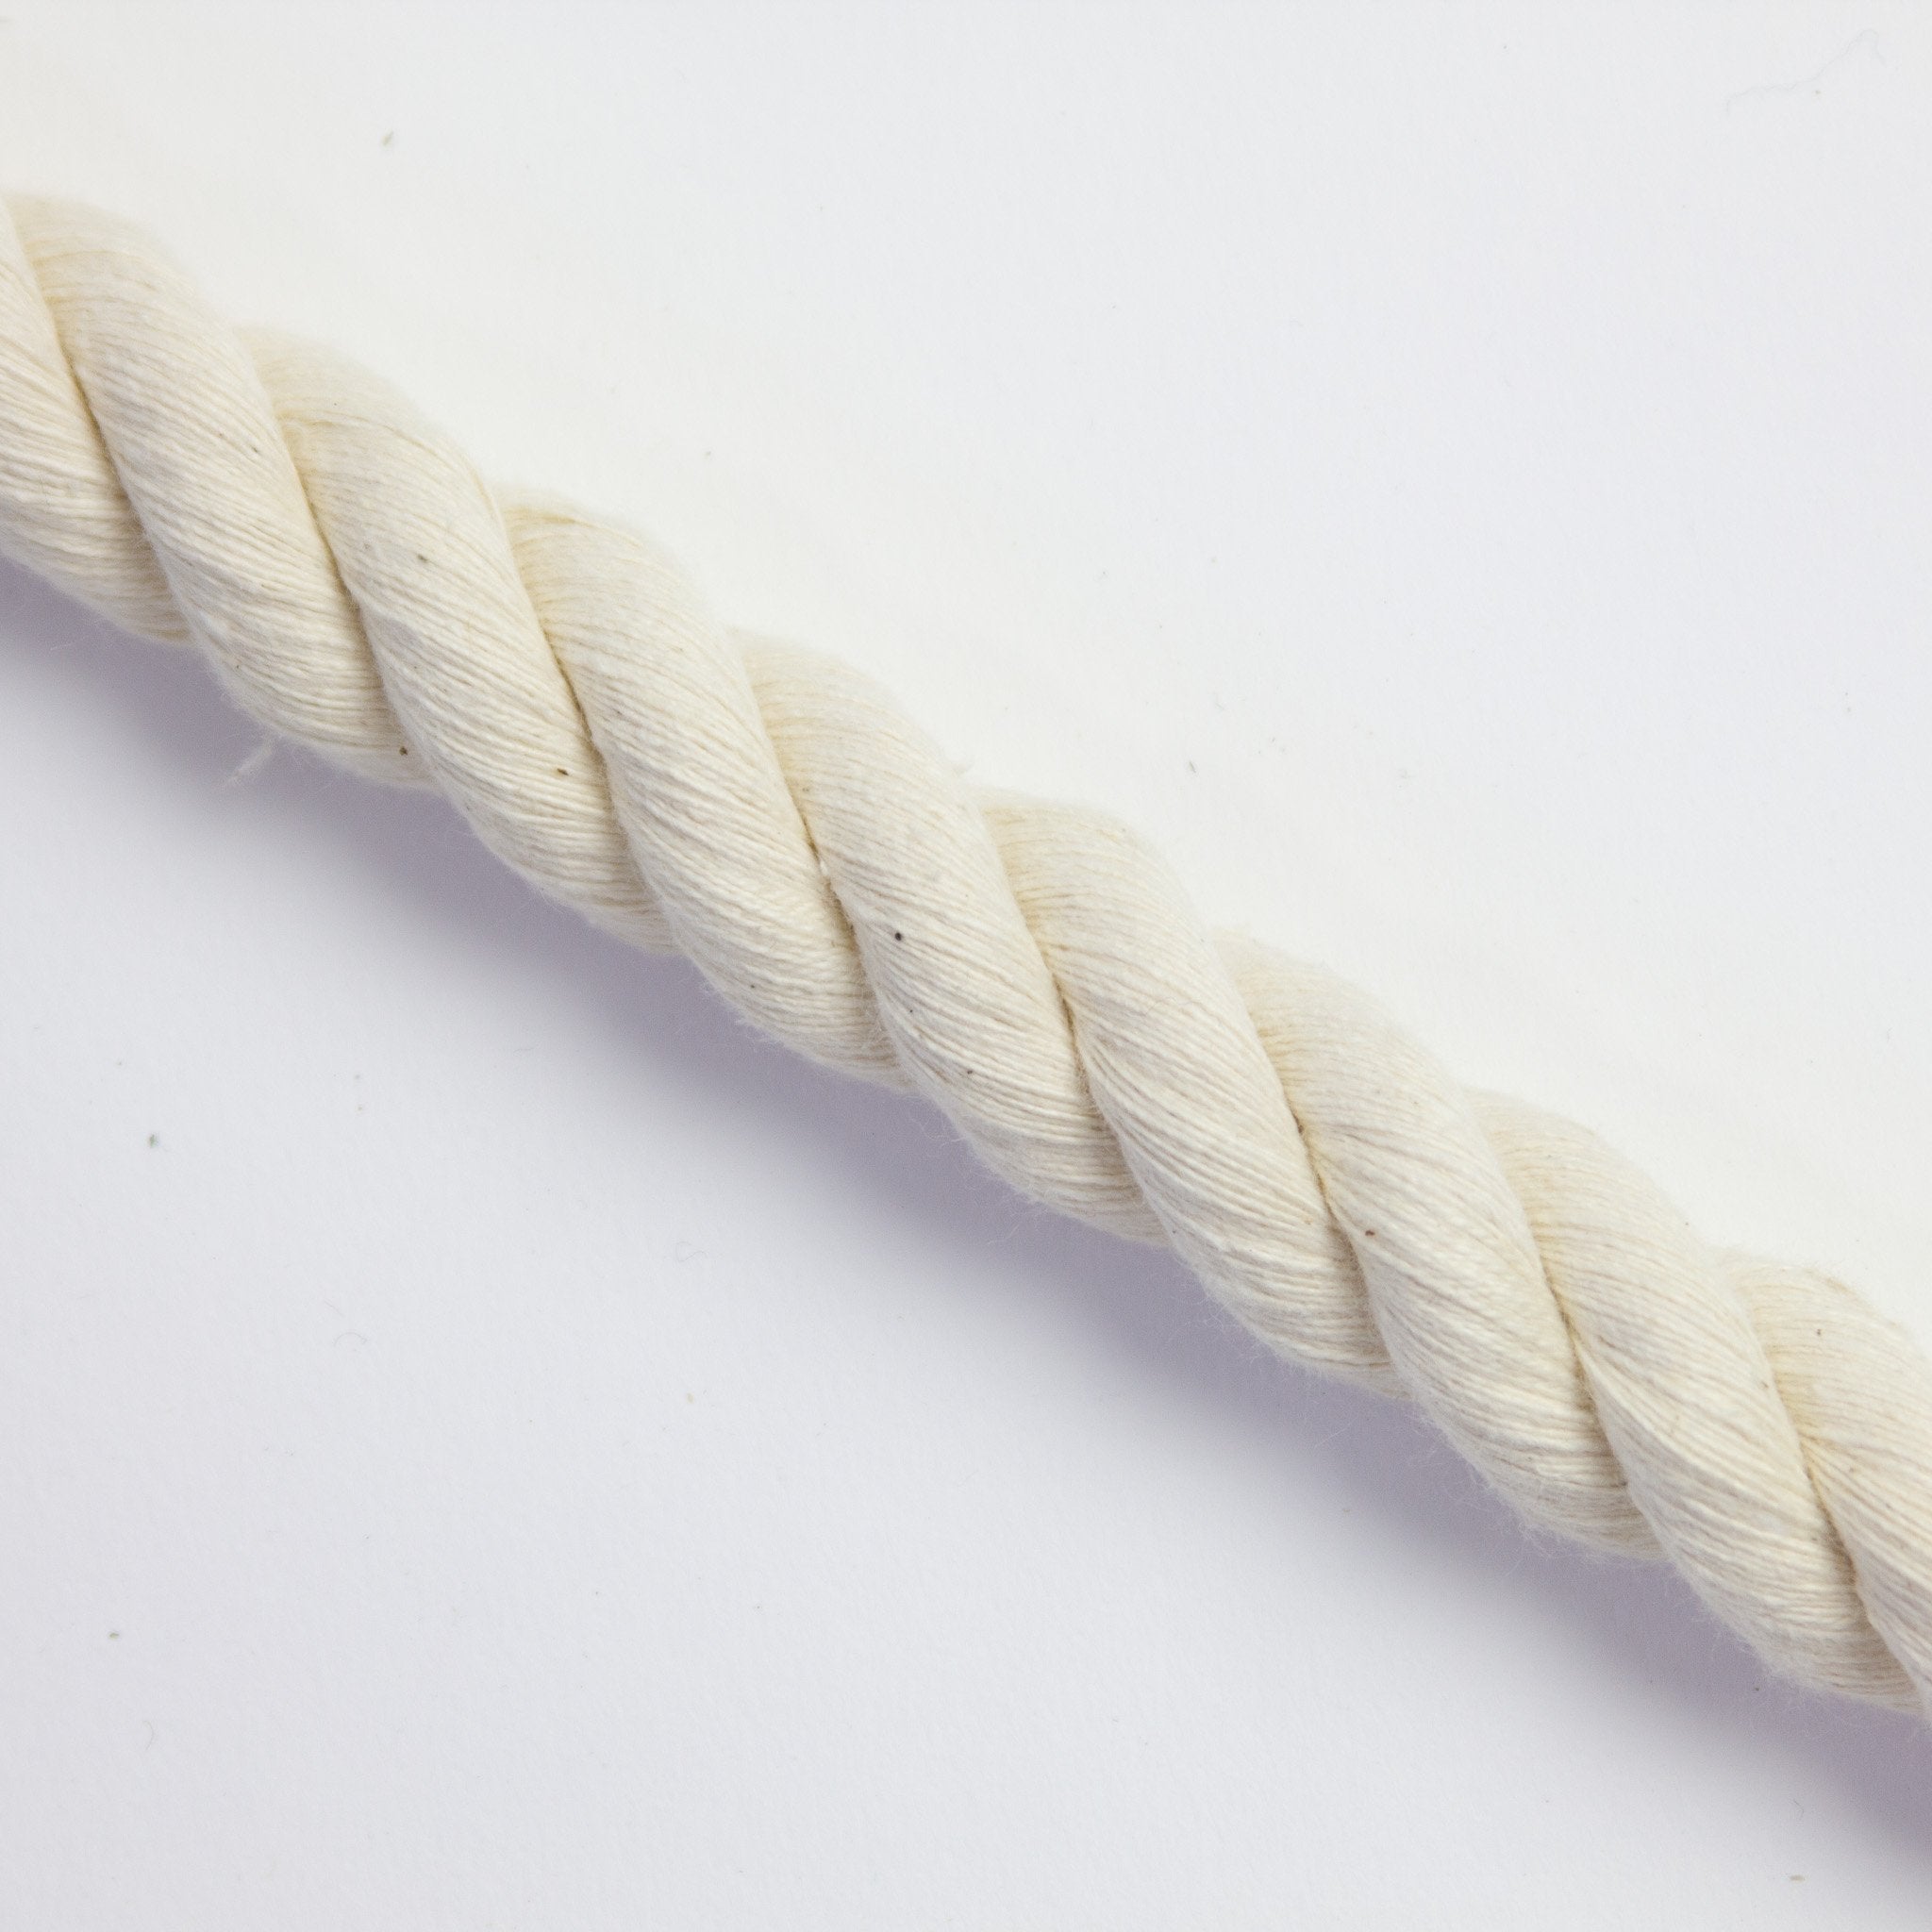 Three Strand Unbleached Soft Cotton Rope